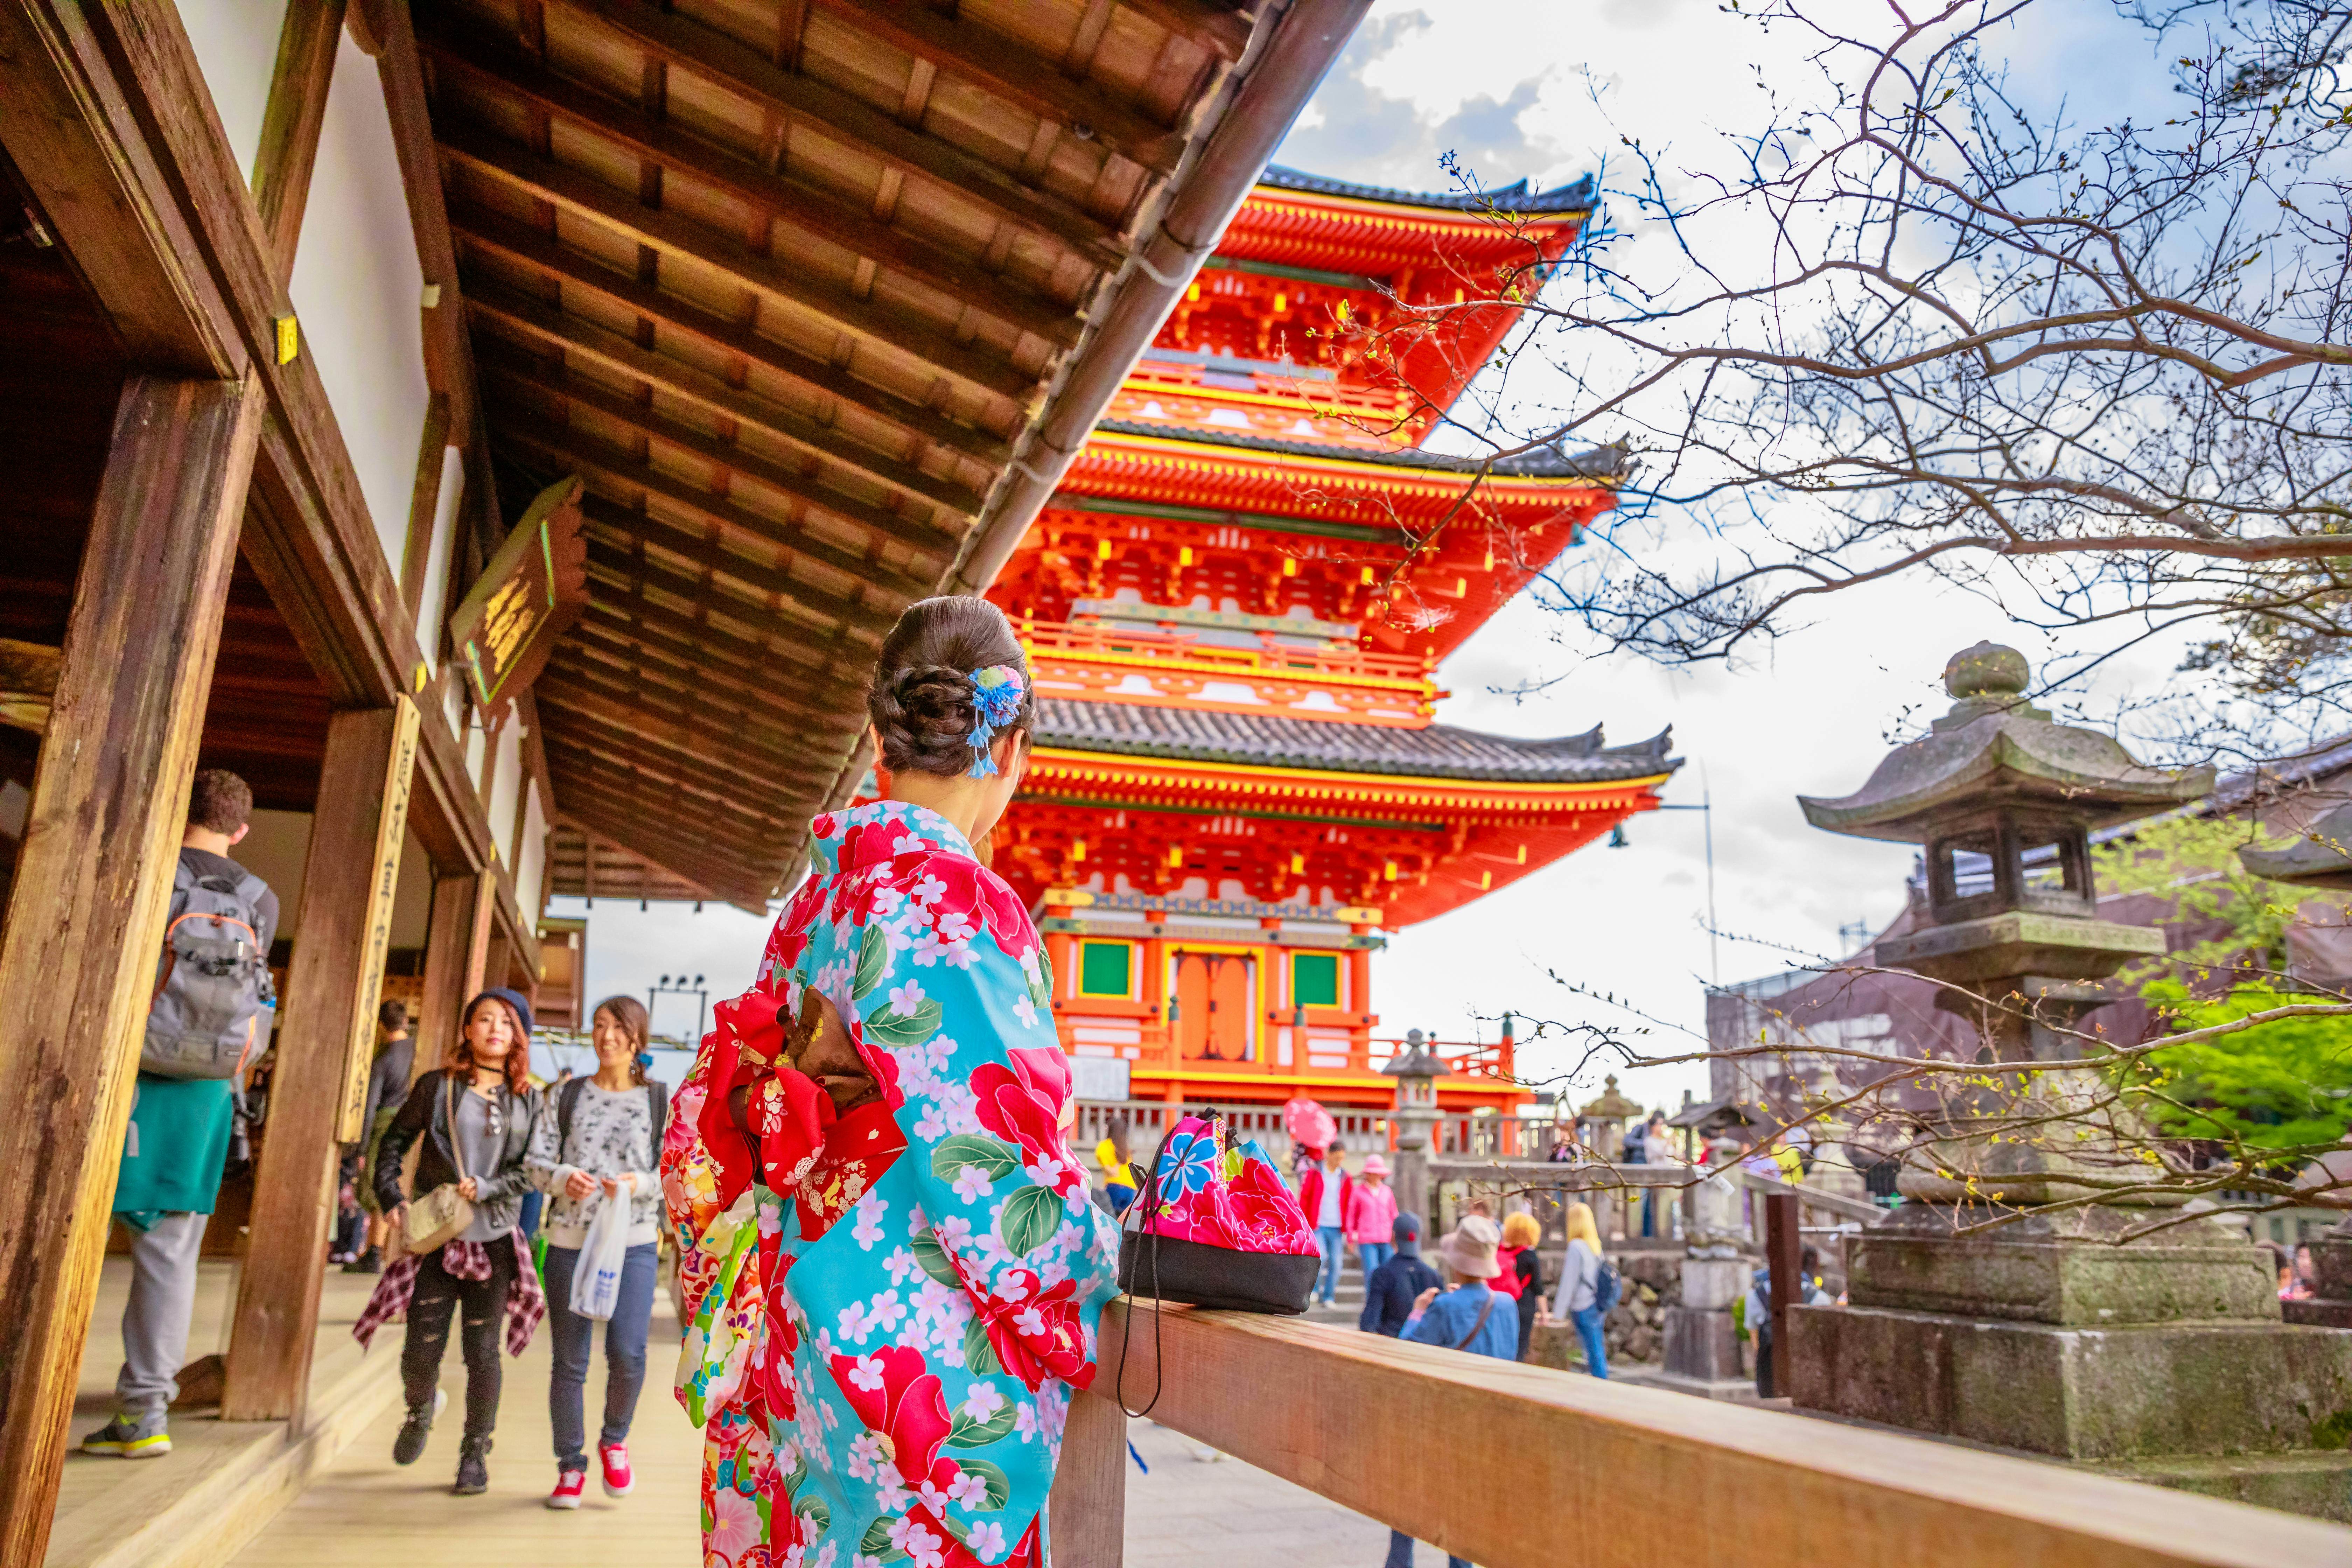 Kyoto is not a theme park': Tourists told to stay away from